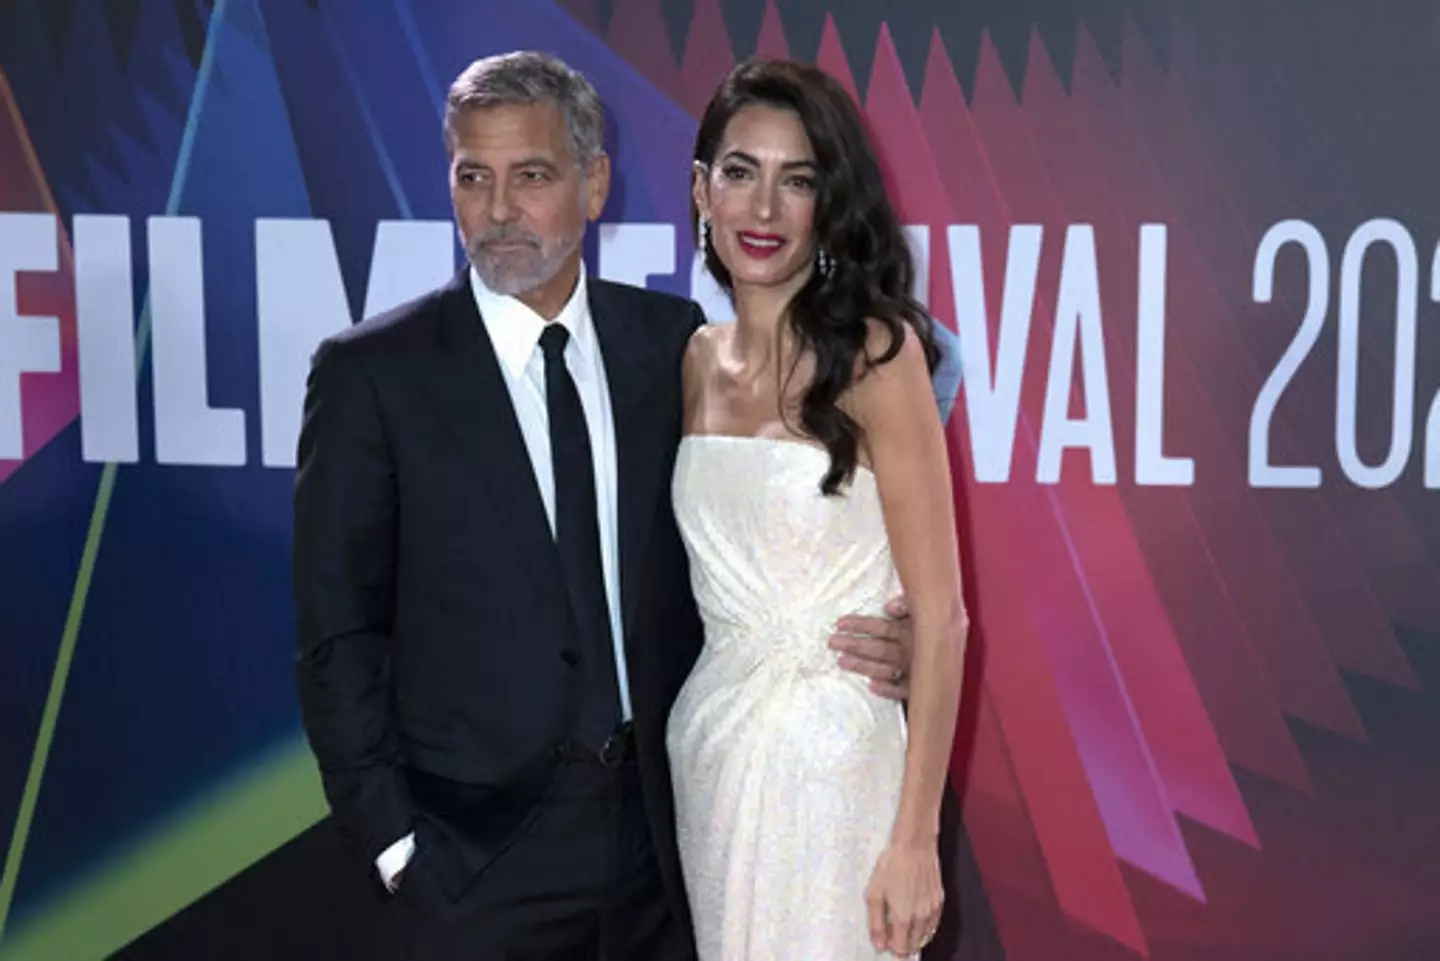 George Clooney and wife Amal Clooney. (